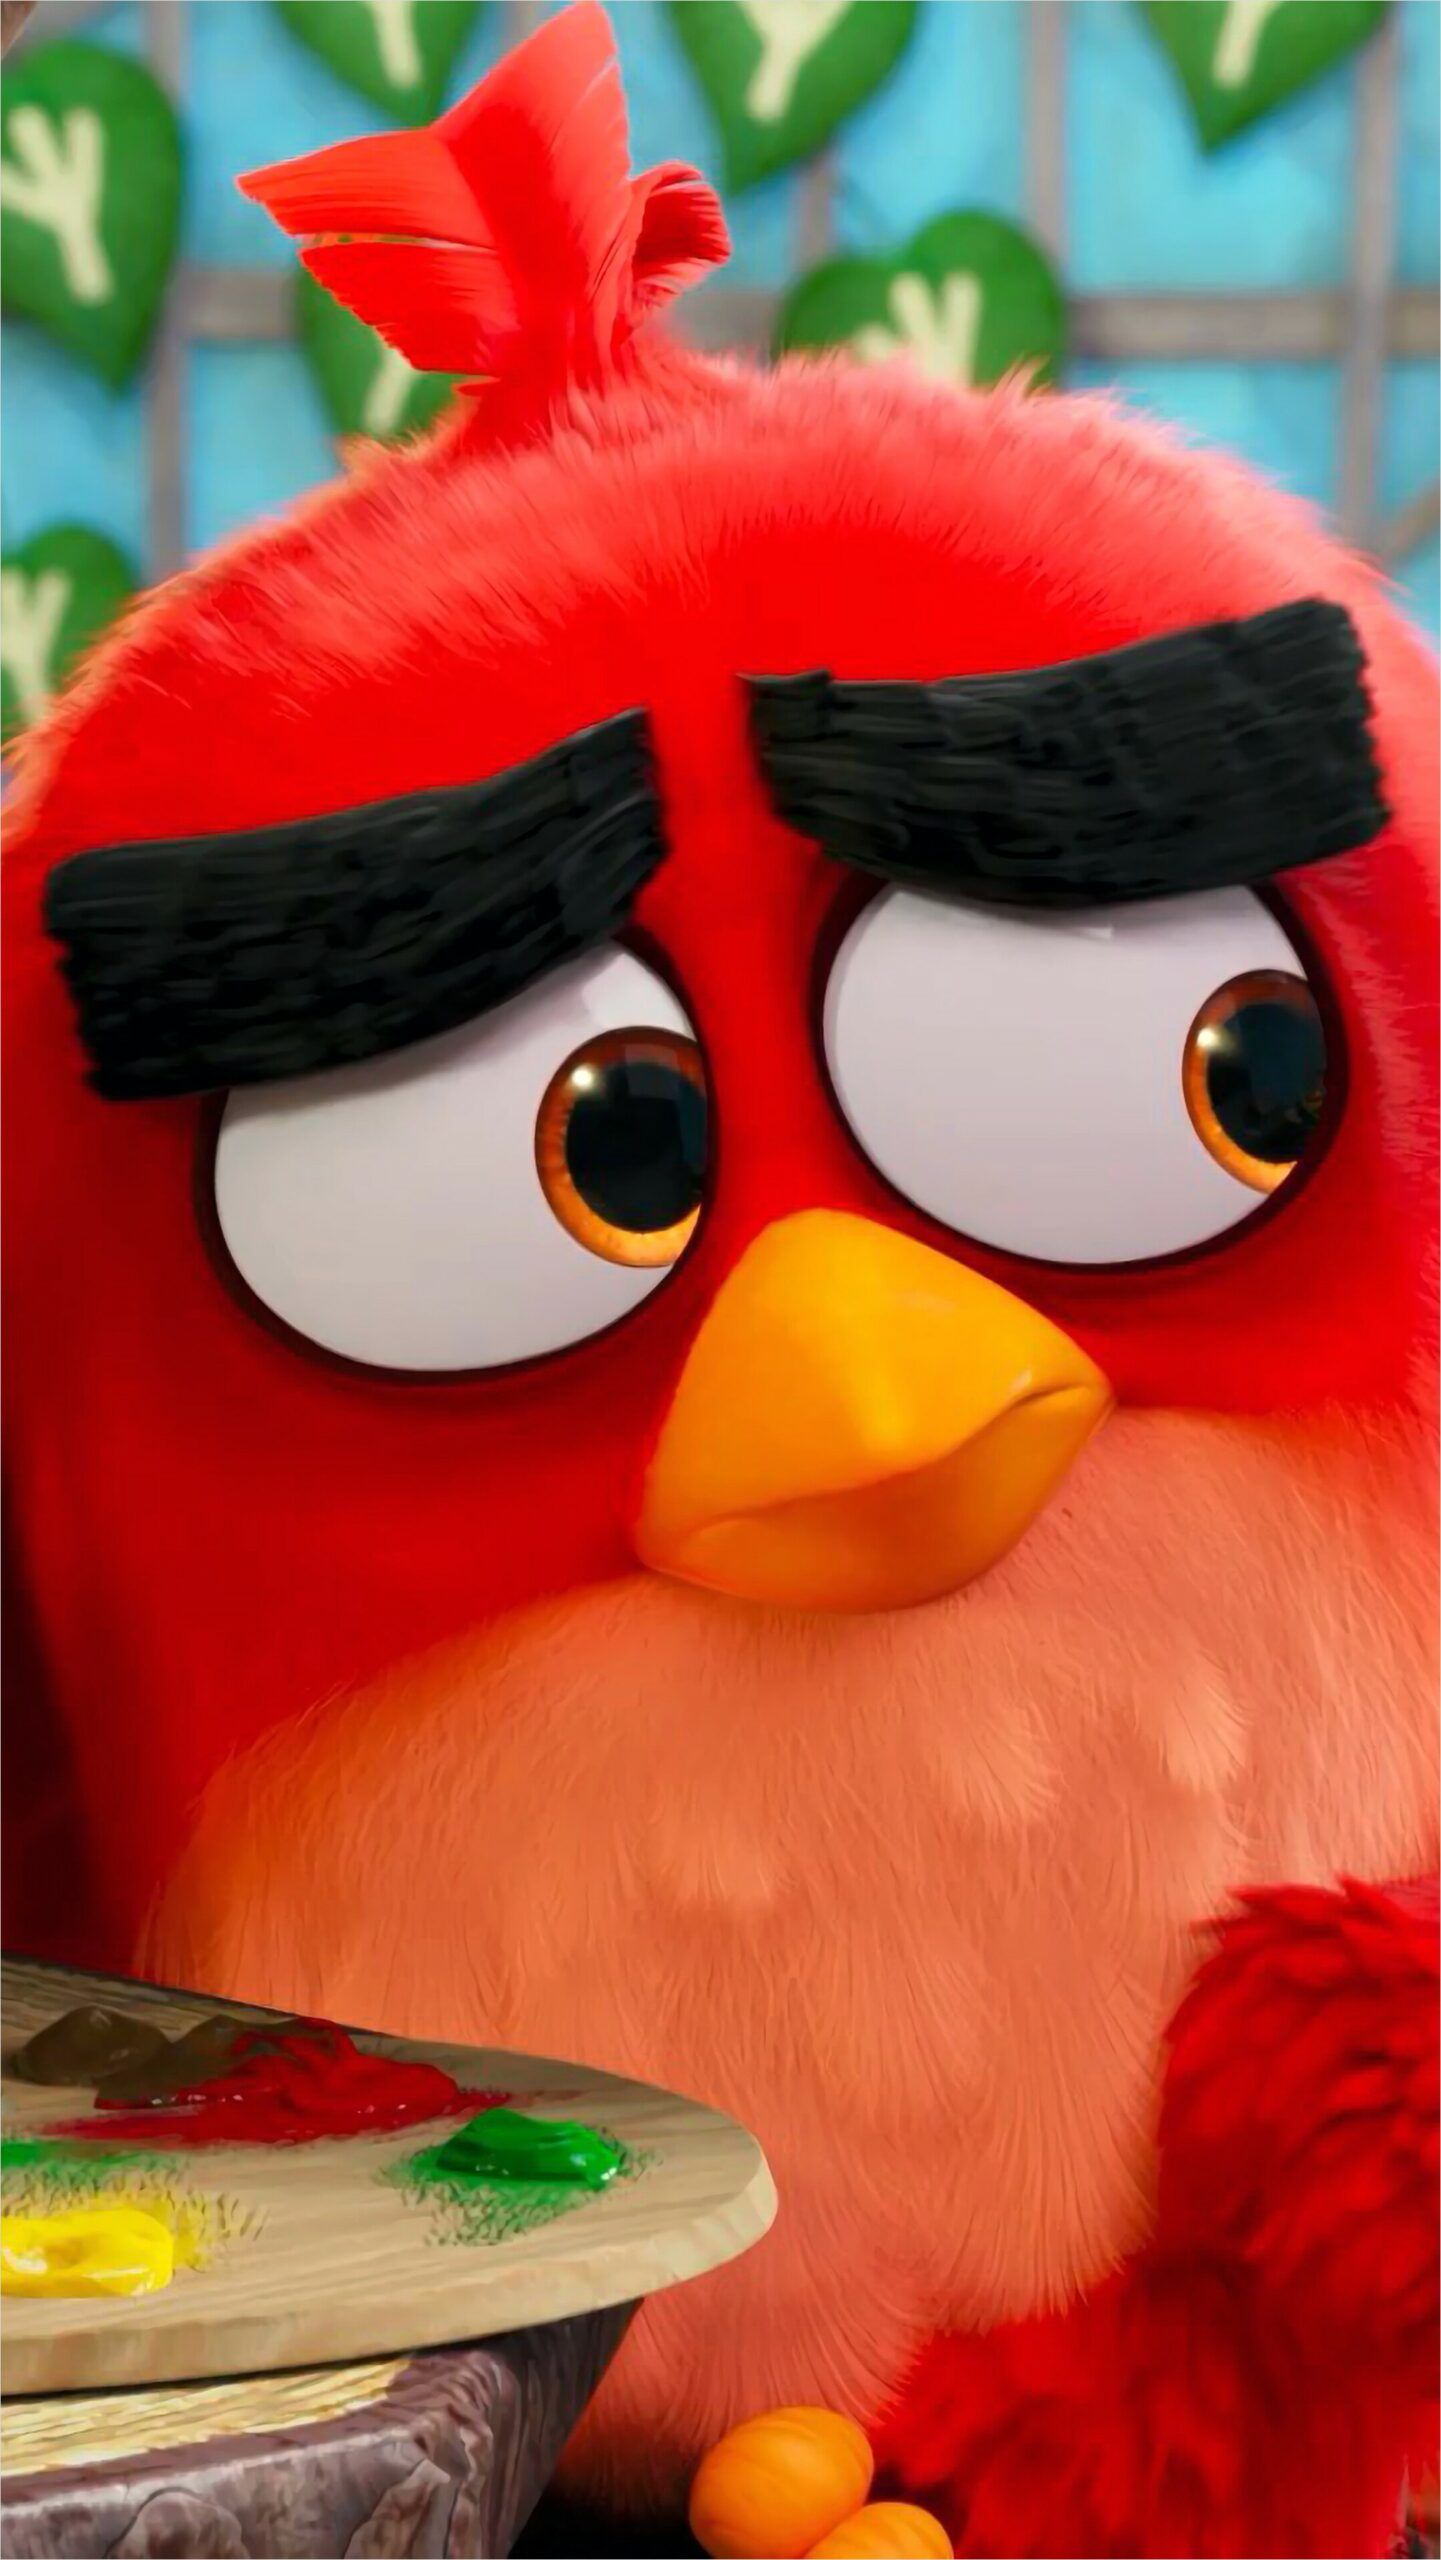 Angry Birds Wallpaper 4k. Bird wallpaper, Red angry bird, Angry birds movie